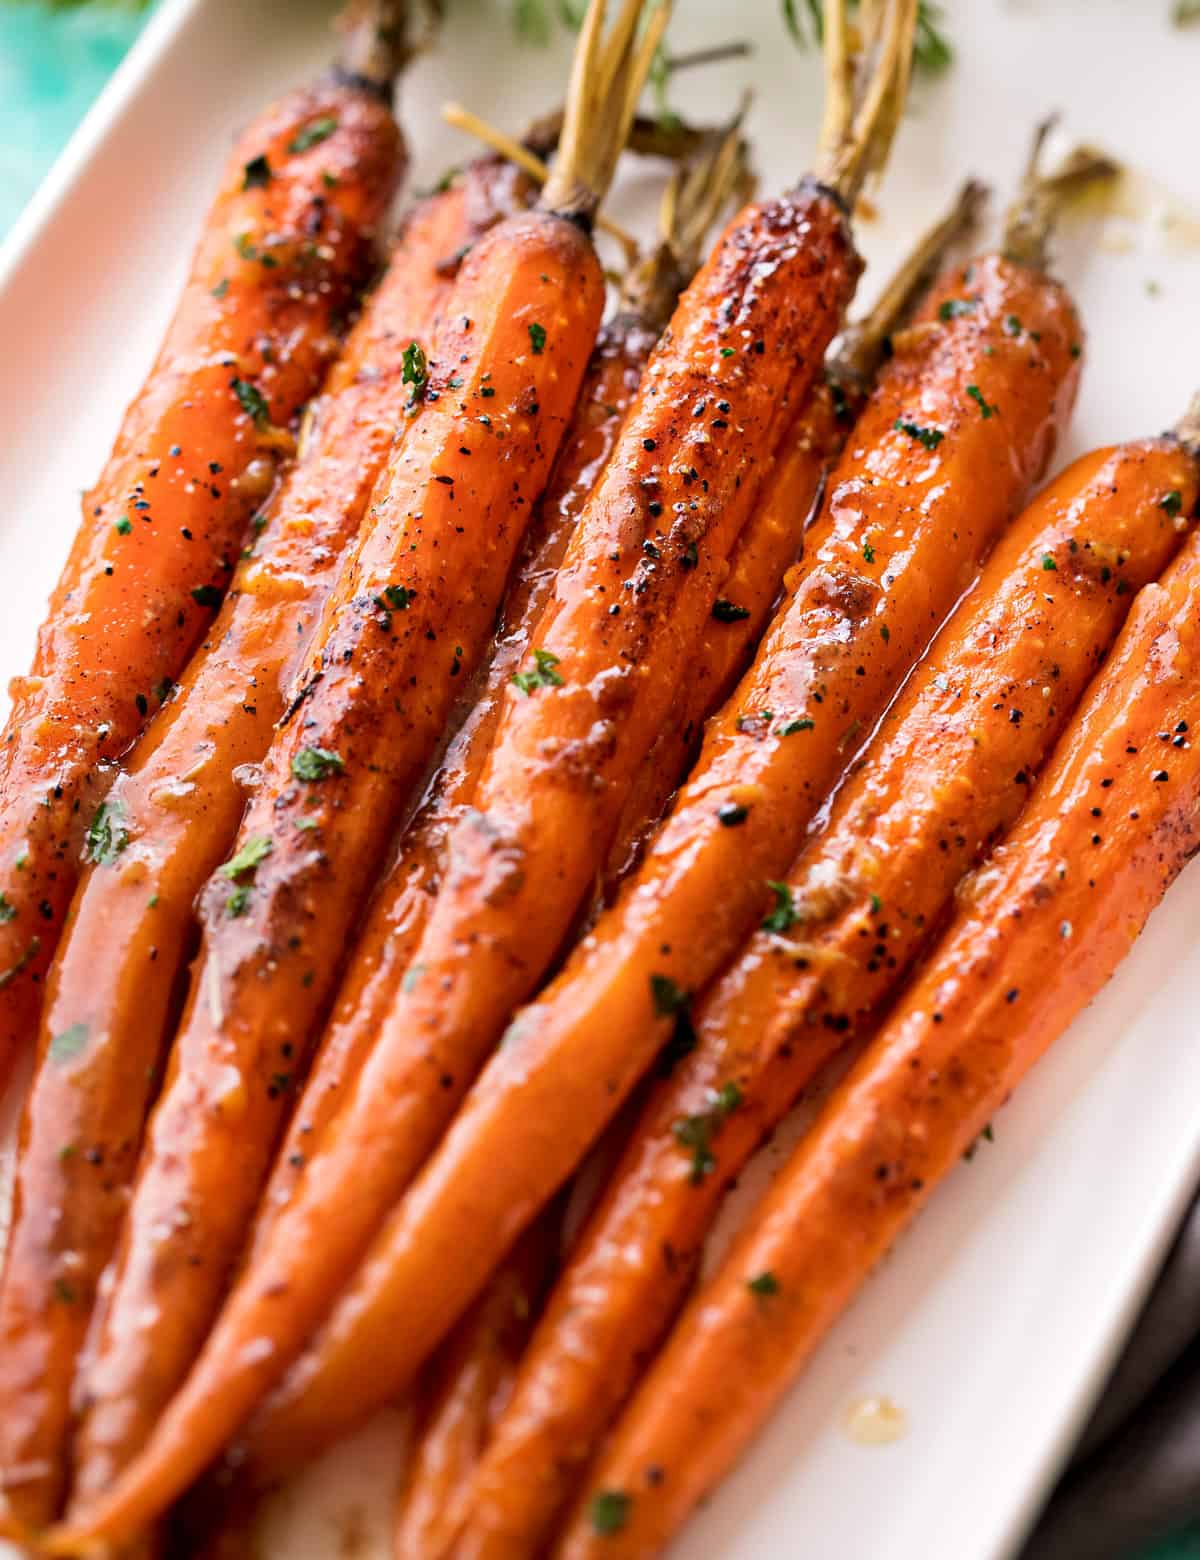 https://www.thechunkychef.com/wp-content/uploads/2018/03/Slow-Cooker-Glazed-Carrots-feat.jpg